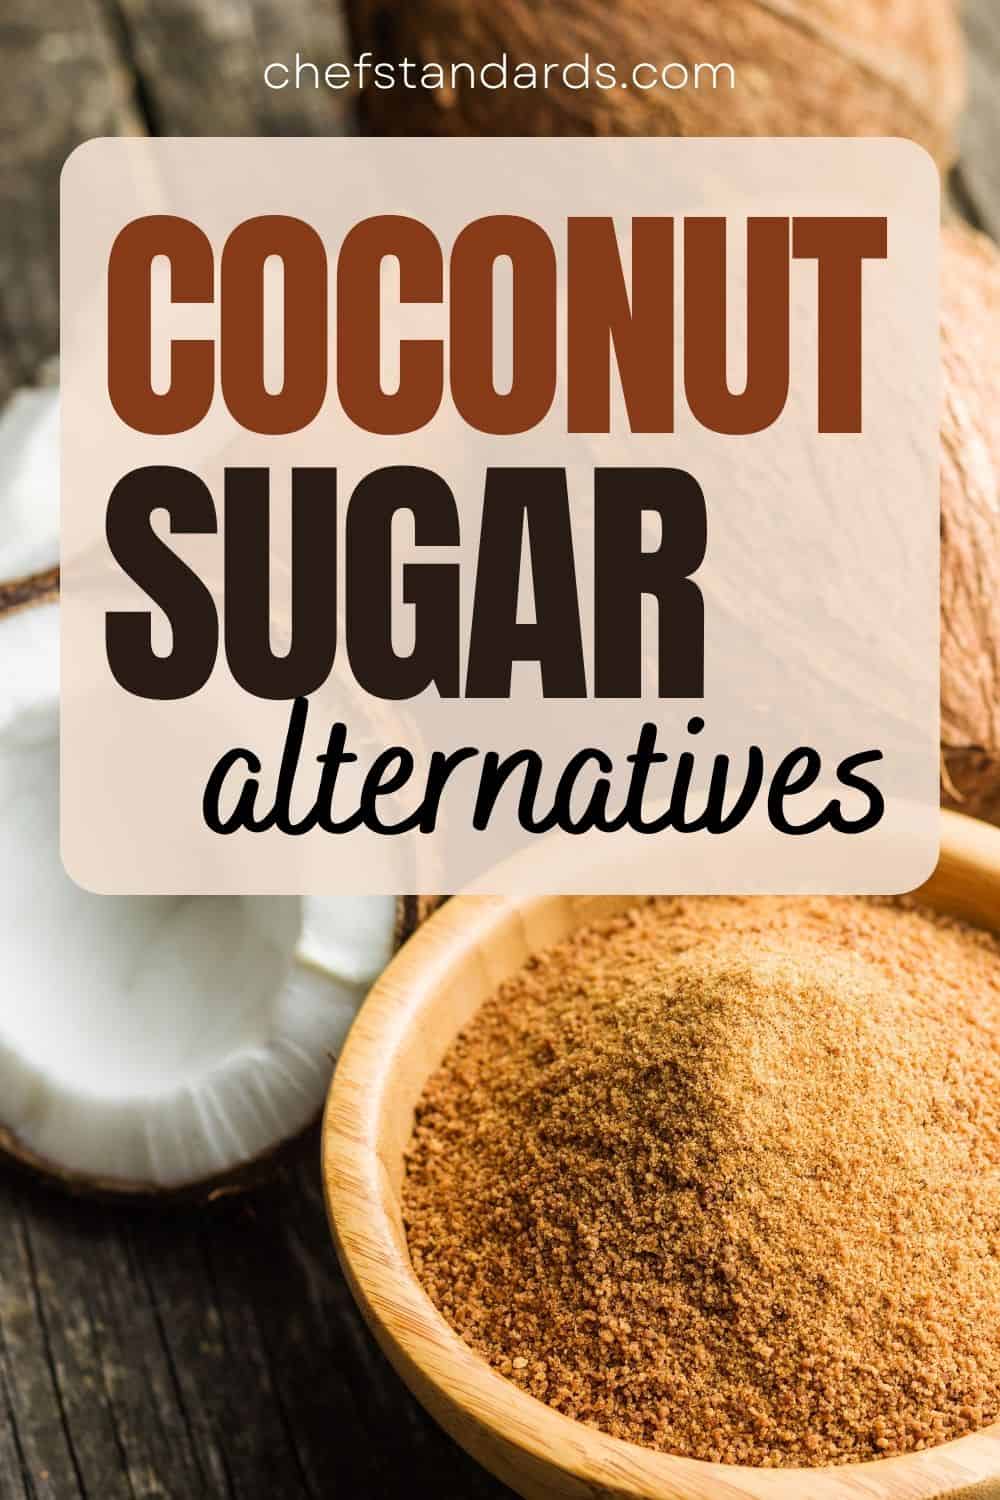 Ideal Substitute For Coconut Sugar Among These 15 Options